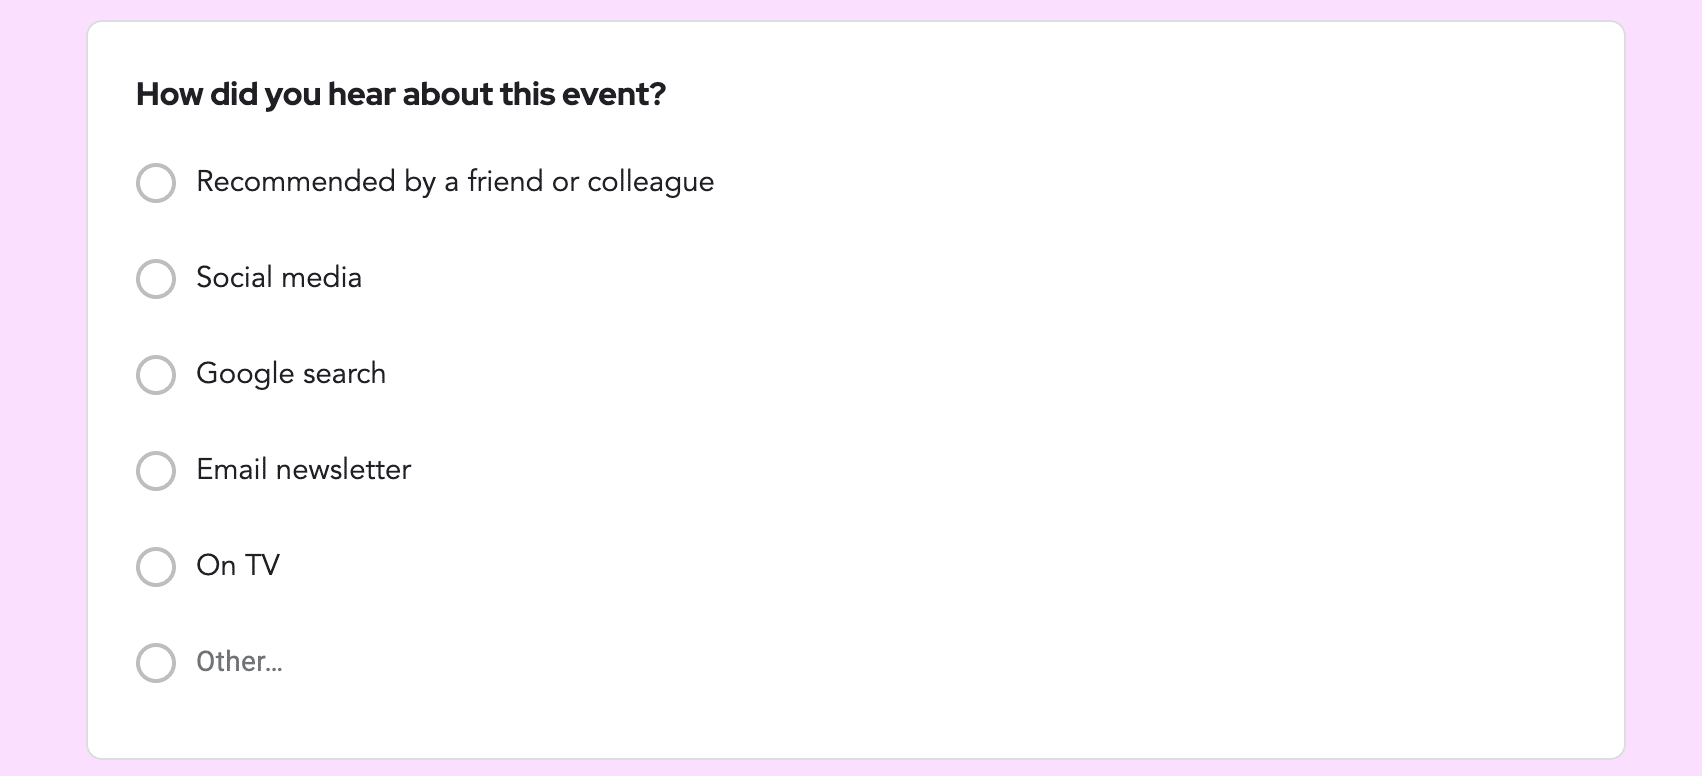 a multiple choice question about where you heard about the event